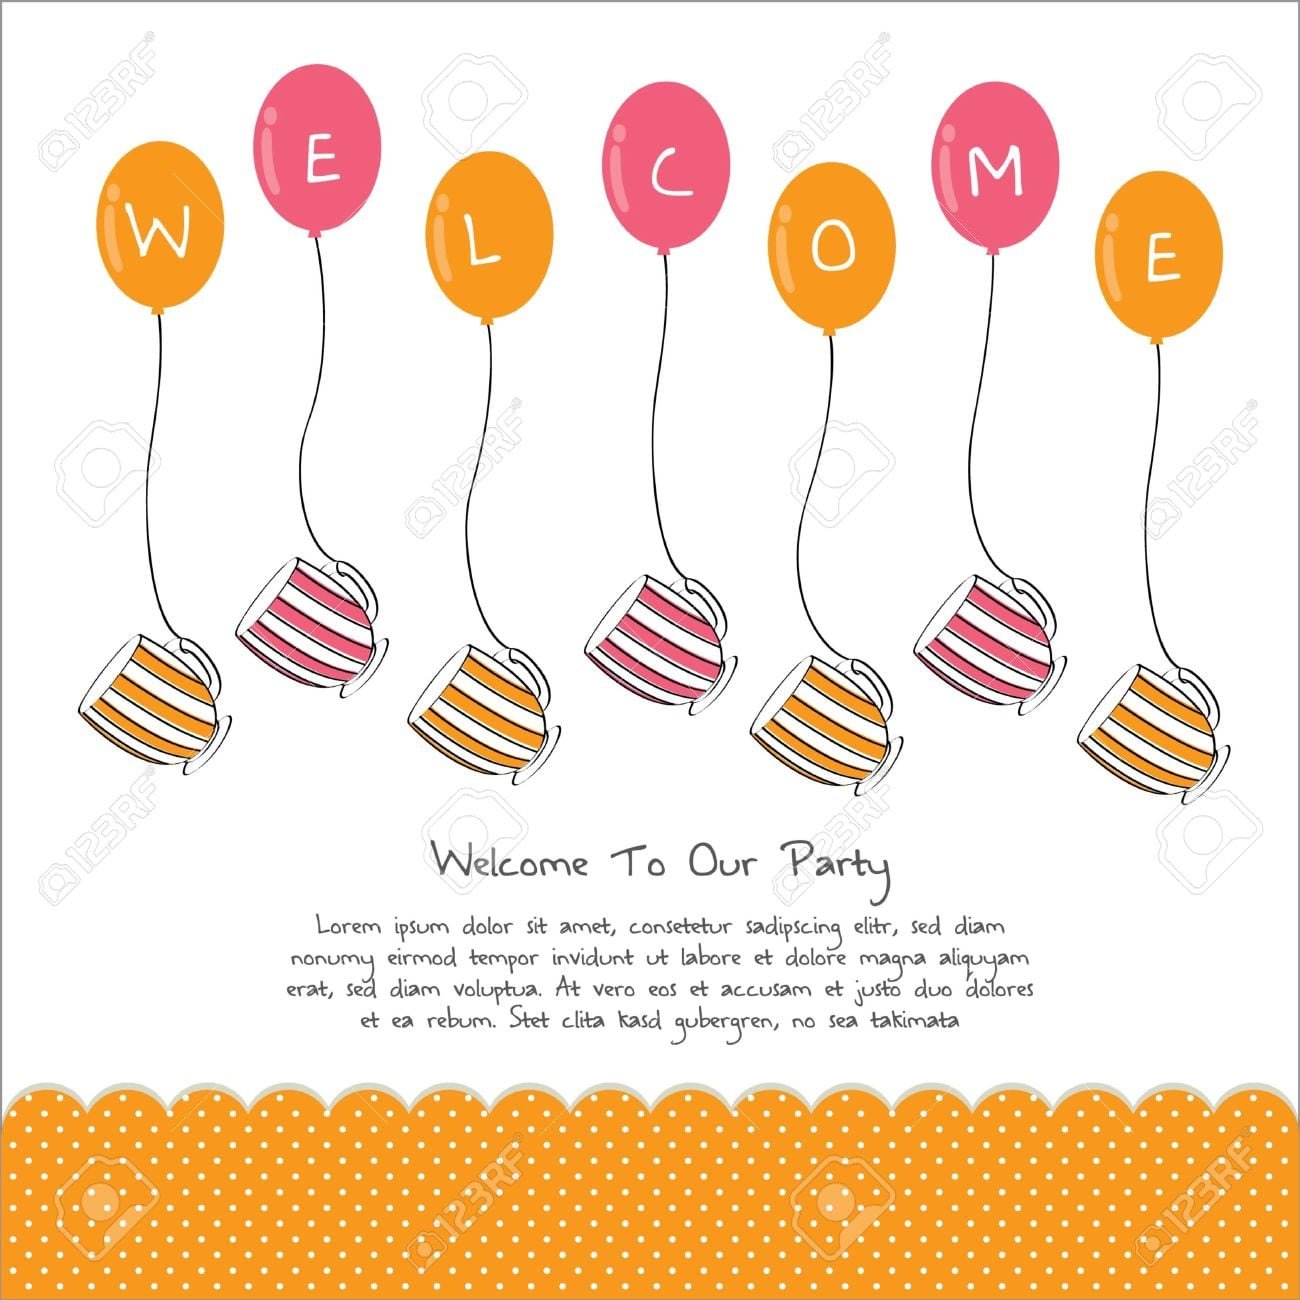 Cute Tea Party Invitation Card With Balloon Royalty Free Cliparts